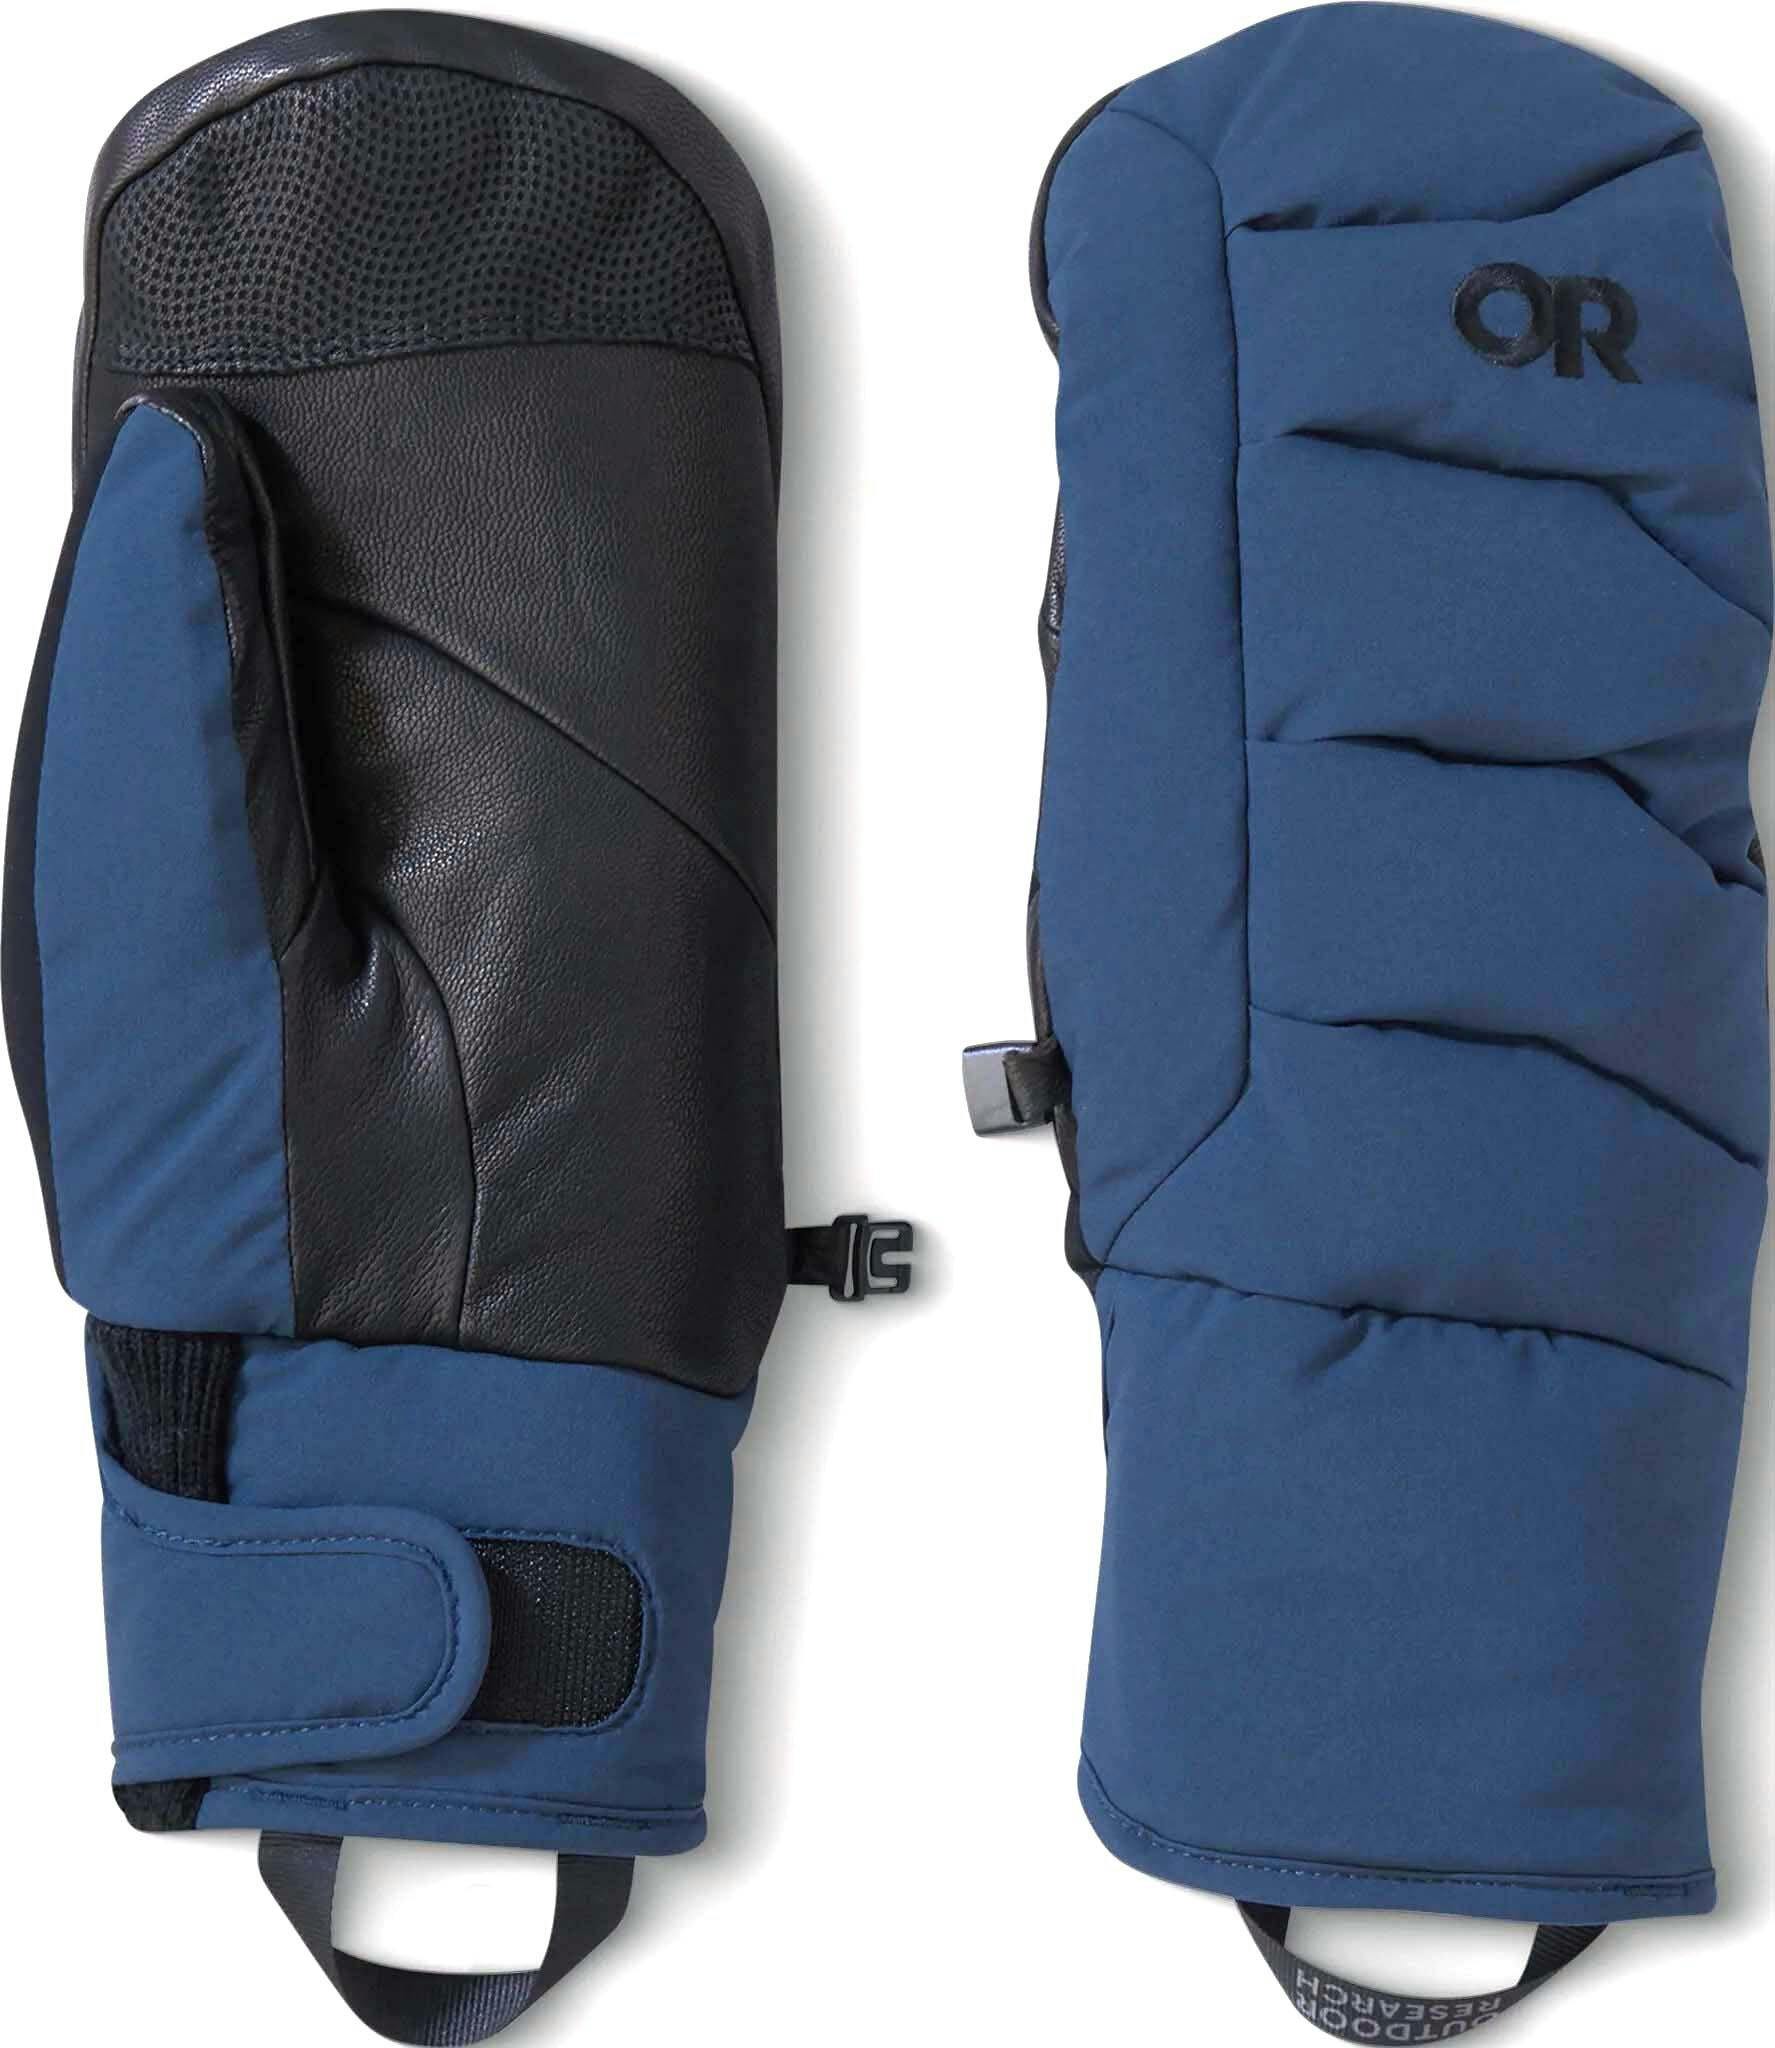 Product image for Stormbound Sensor Mitts - Unisex